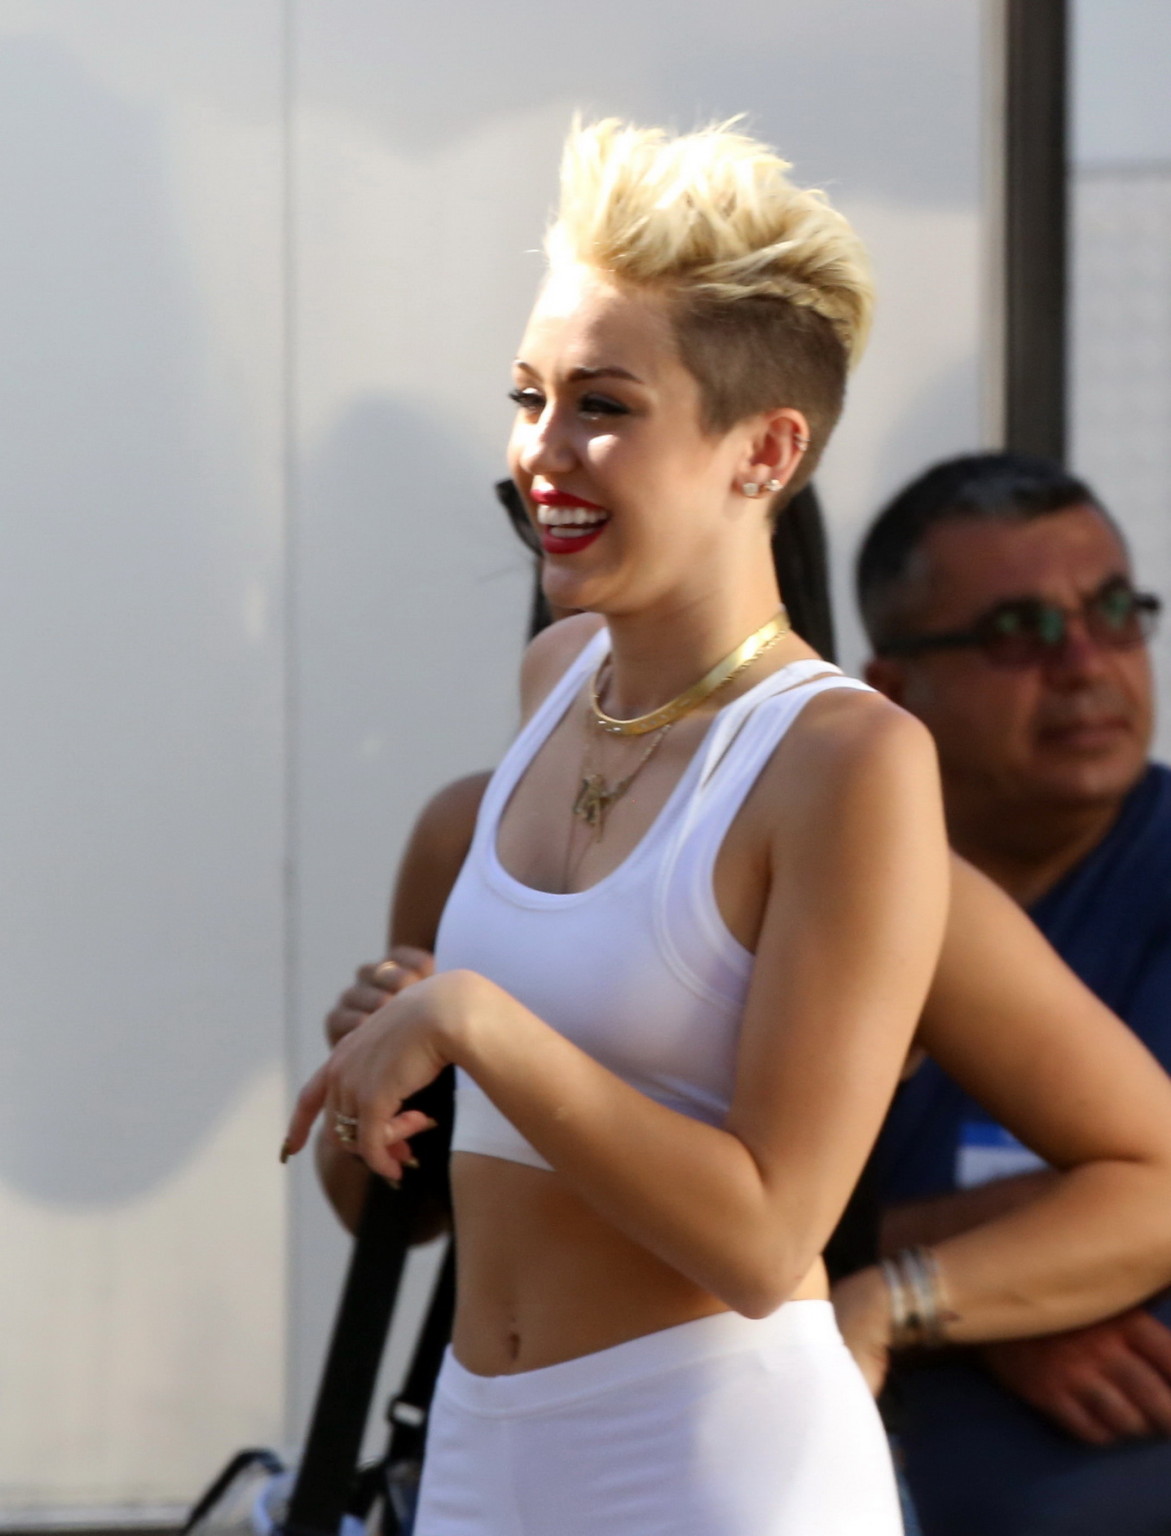 Miley Cyrus wearing the white tights  a sports bra on a music video set in LA #75230698